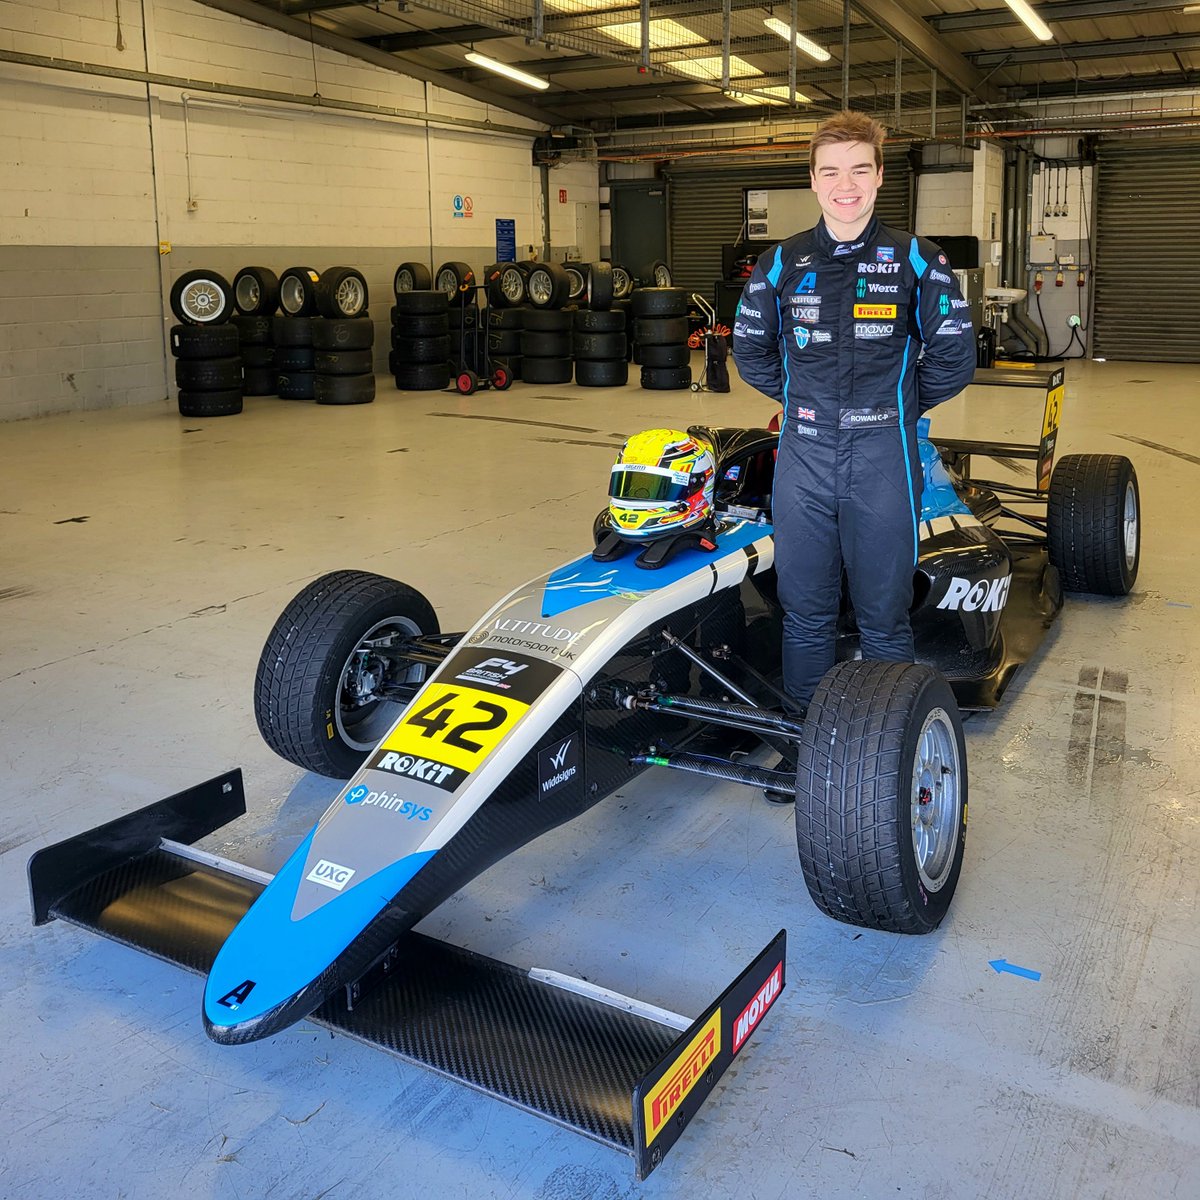 Congratulations and good luck to our Charity ambassador @officialrowancp! 🏎️💛 This week Rowan has made his British Formula 4 debut in Donnington. Rowan has gone above and beyond for the Charity, and we’re so excited to watch him take this next step in his career. ✨